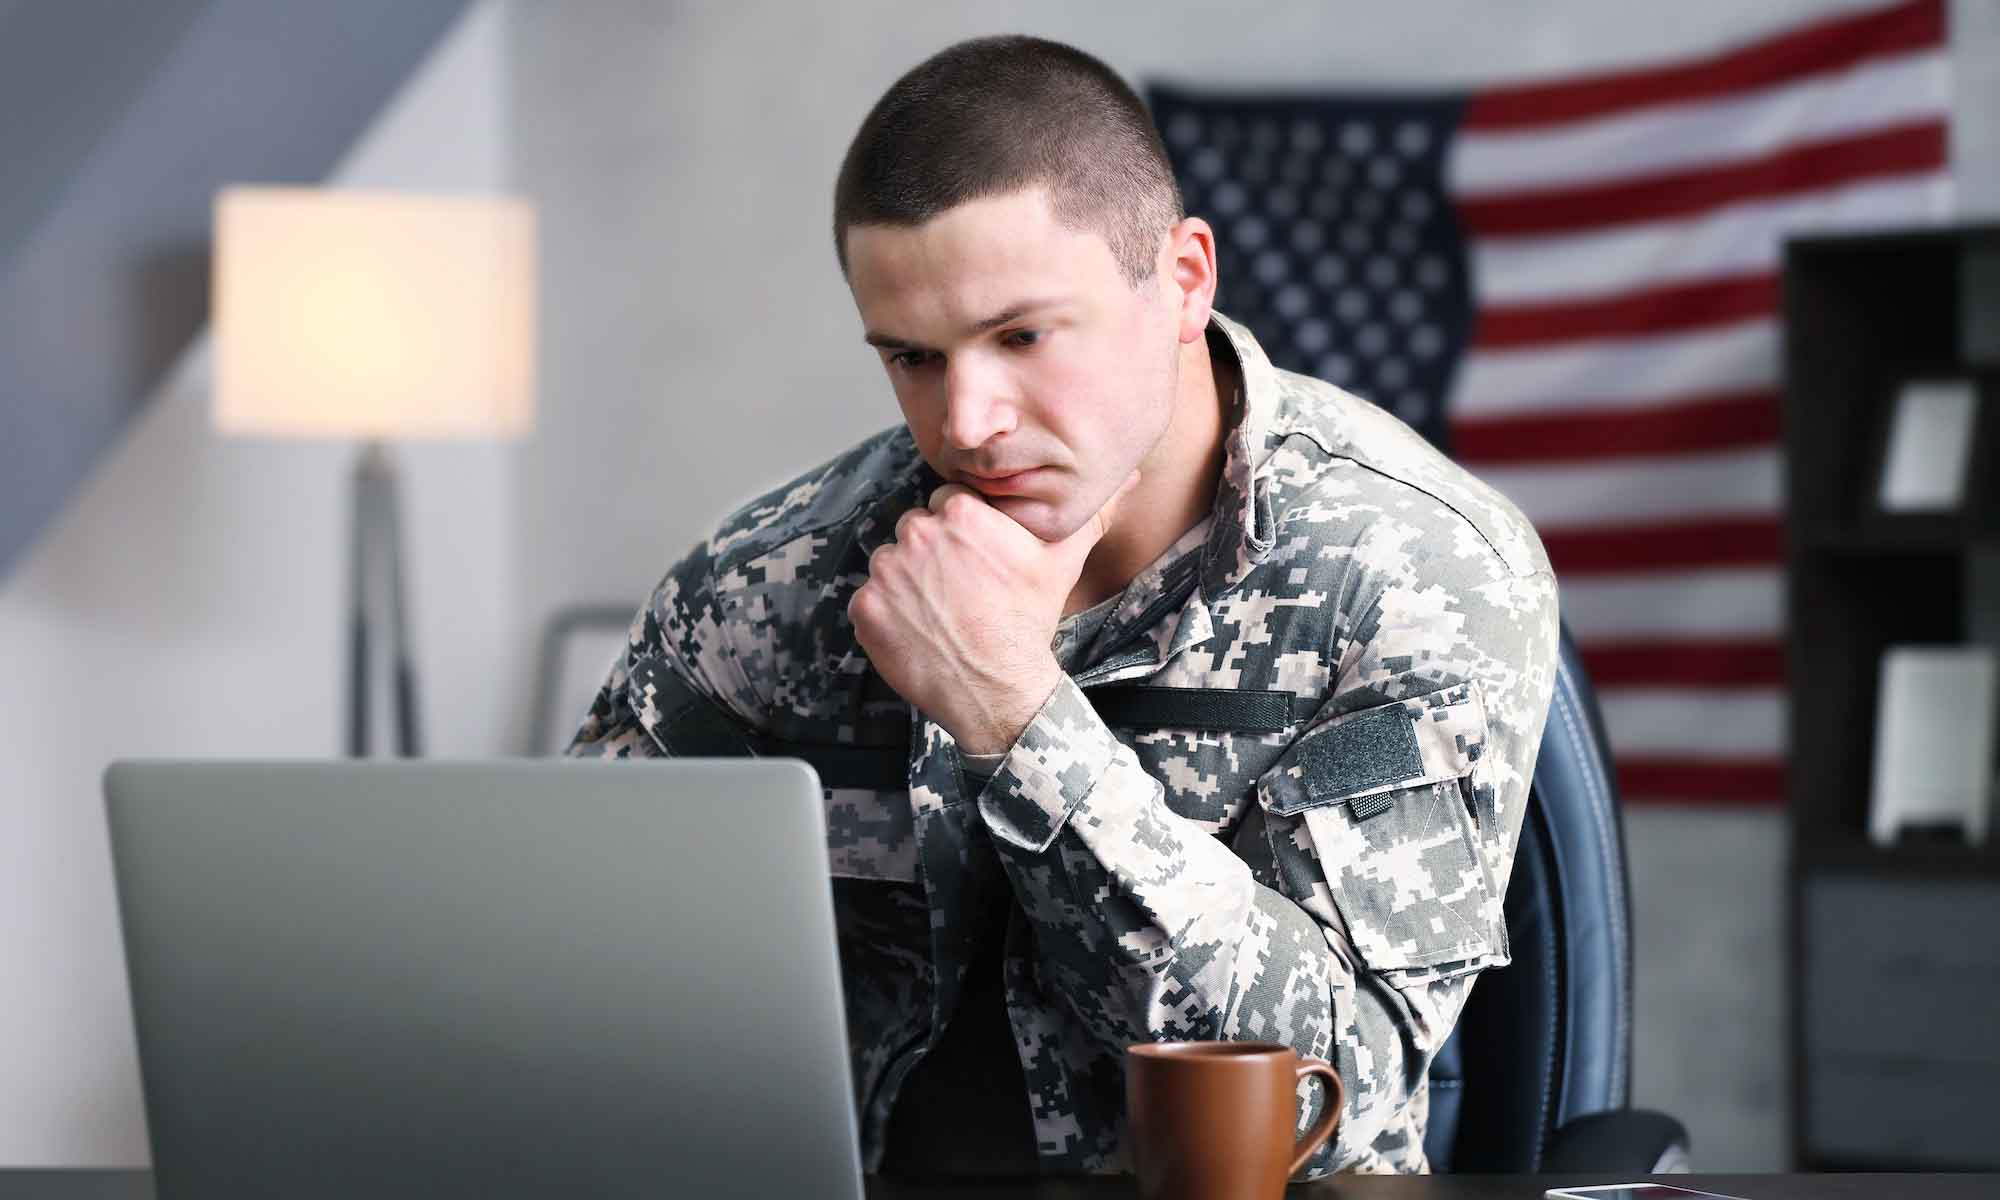 Military person sitting at desk working on laptop